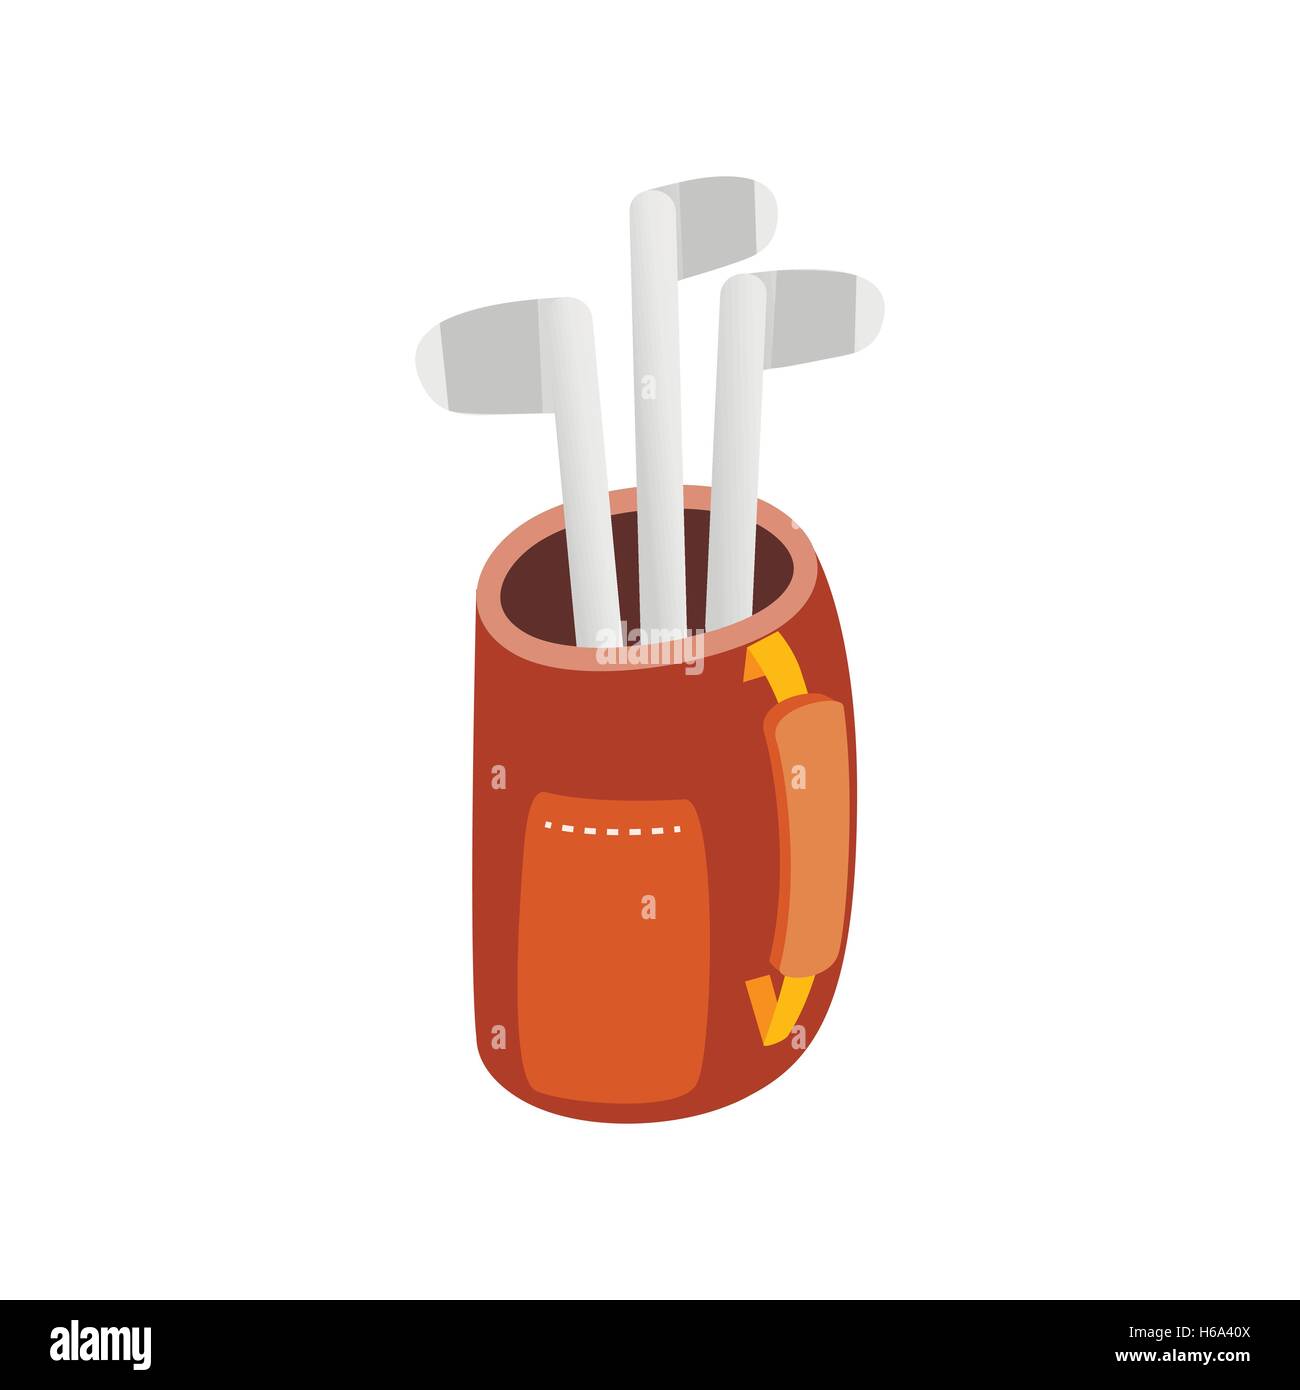 Golf clubs in a brown bag isometric 3d icon Stock Vector